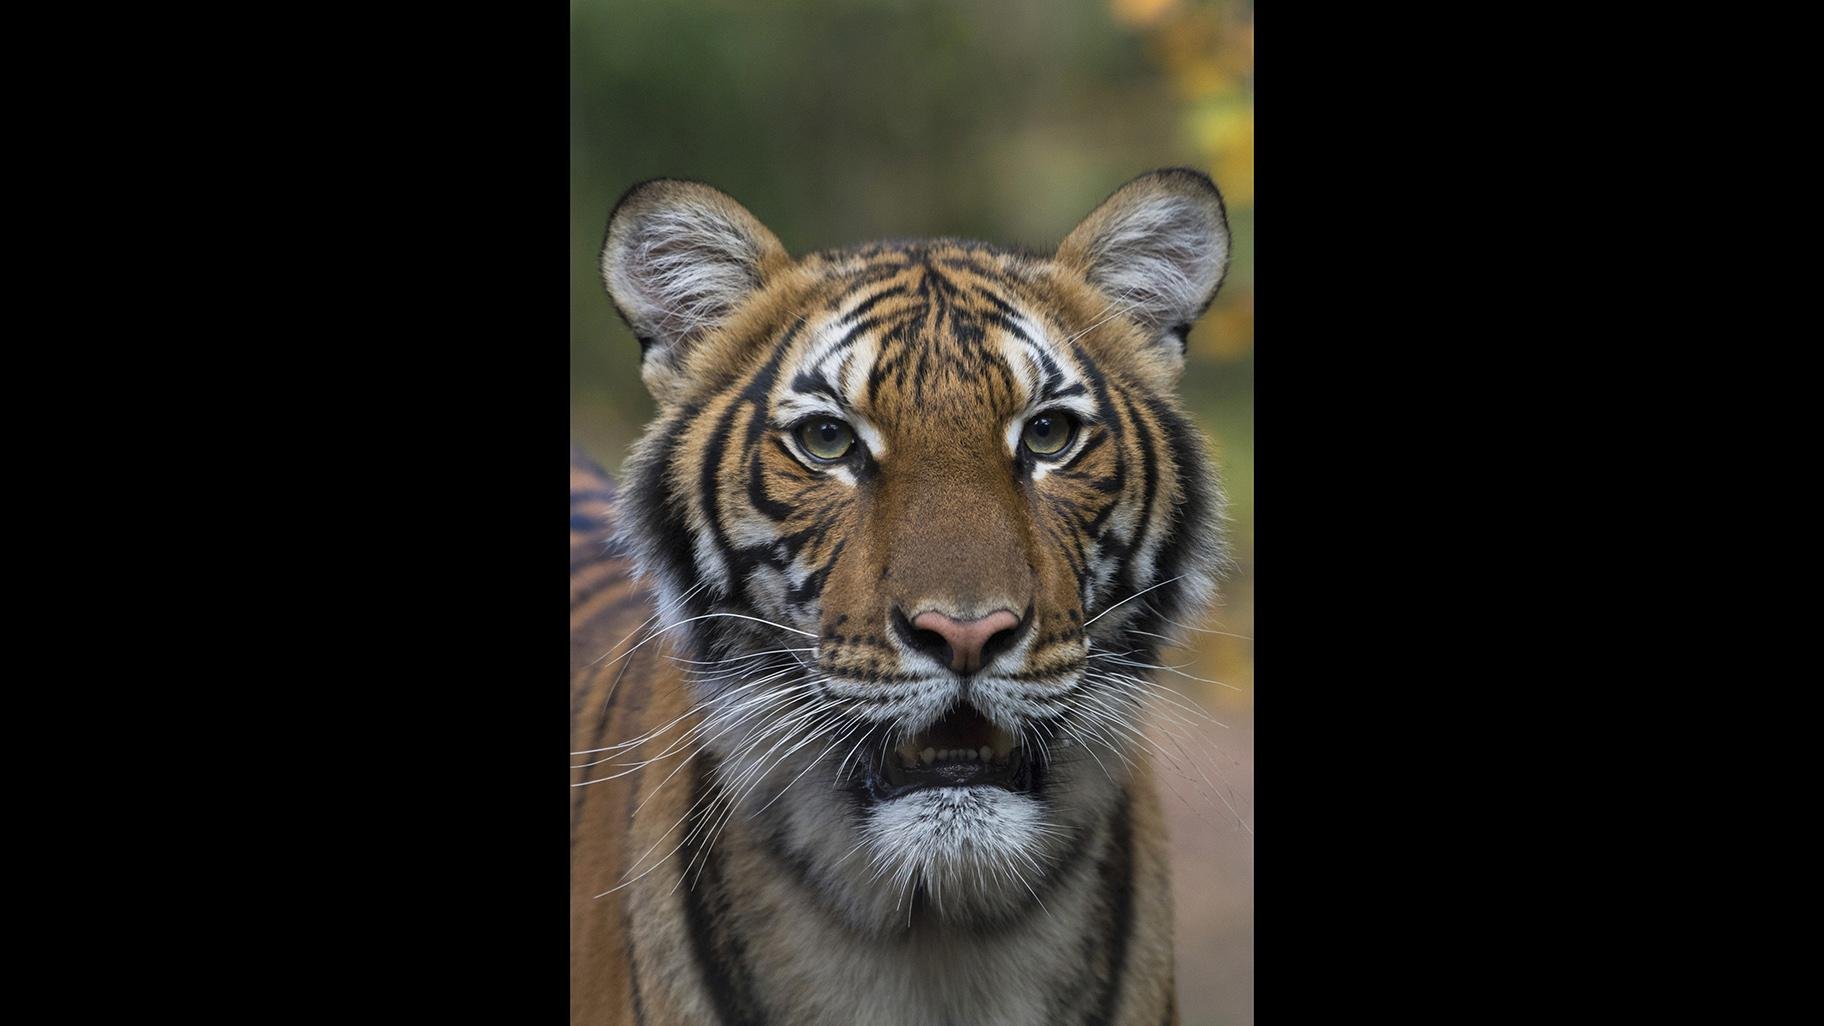 This undated photo provided by the Wildlife Conservation Society shows Nadia, a Malayan tiger at the Bronx Zoo in New York. (Julie Larsen Maher / Wildlife Conservation Society via AP)